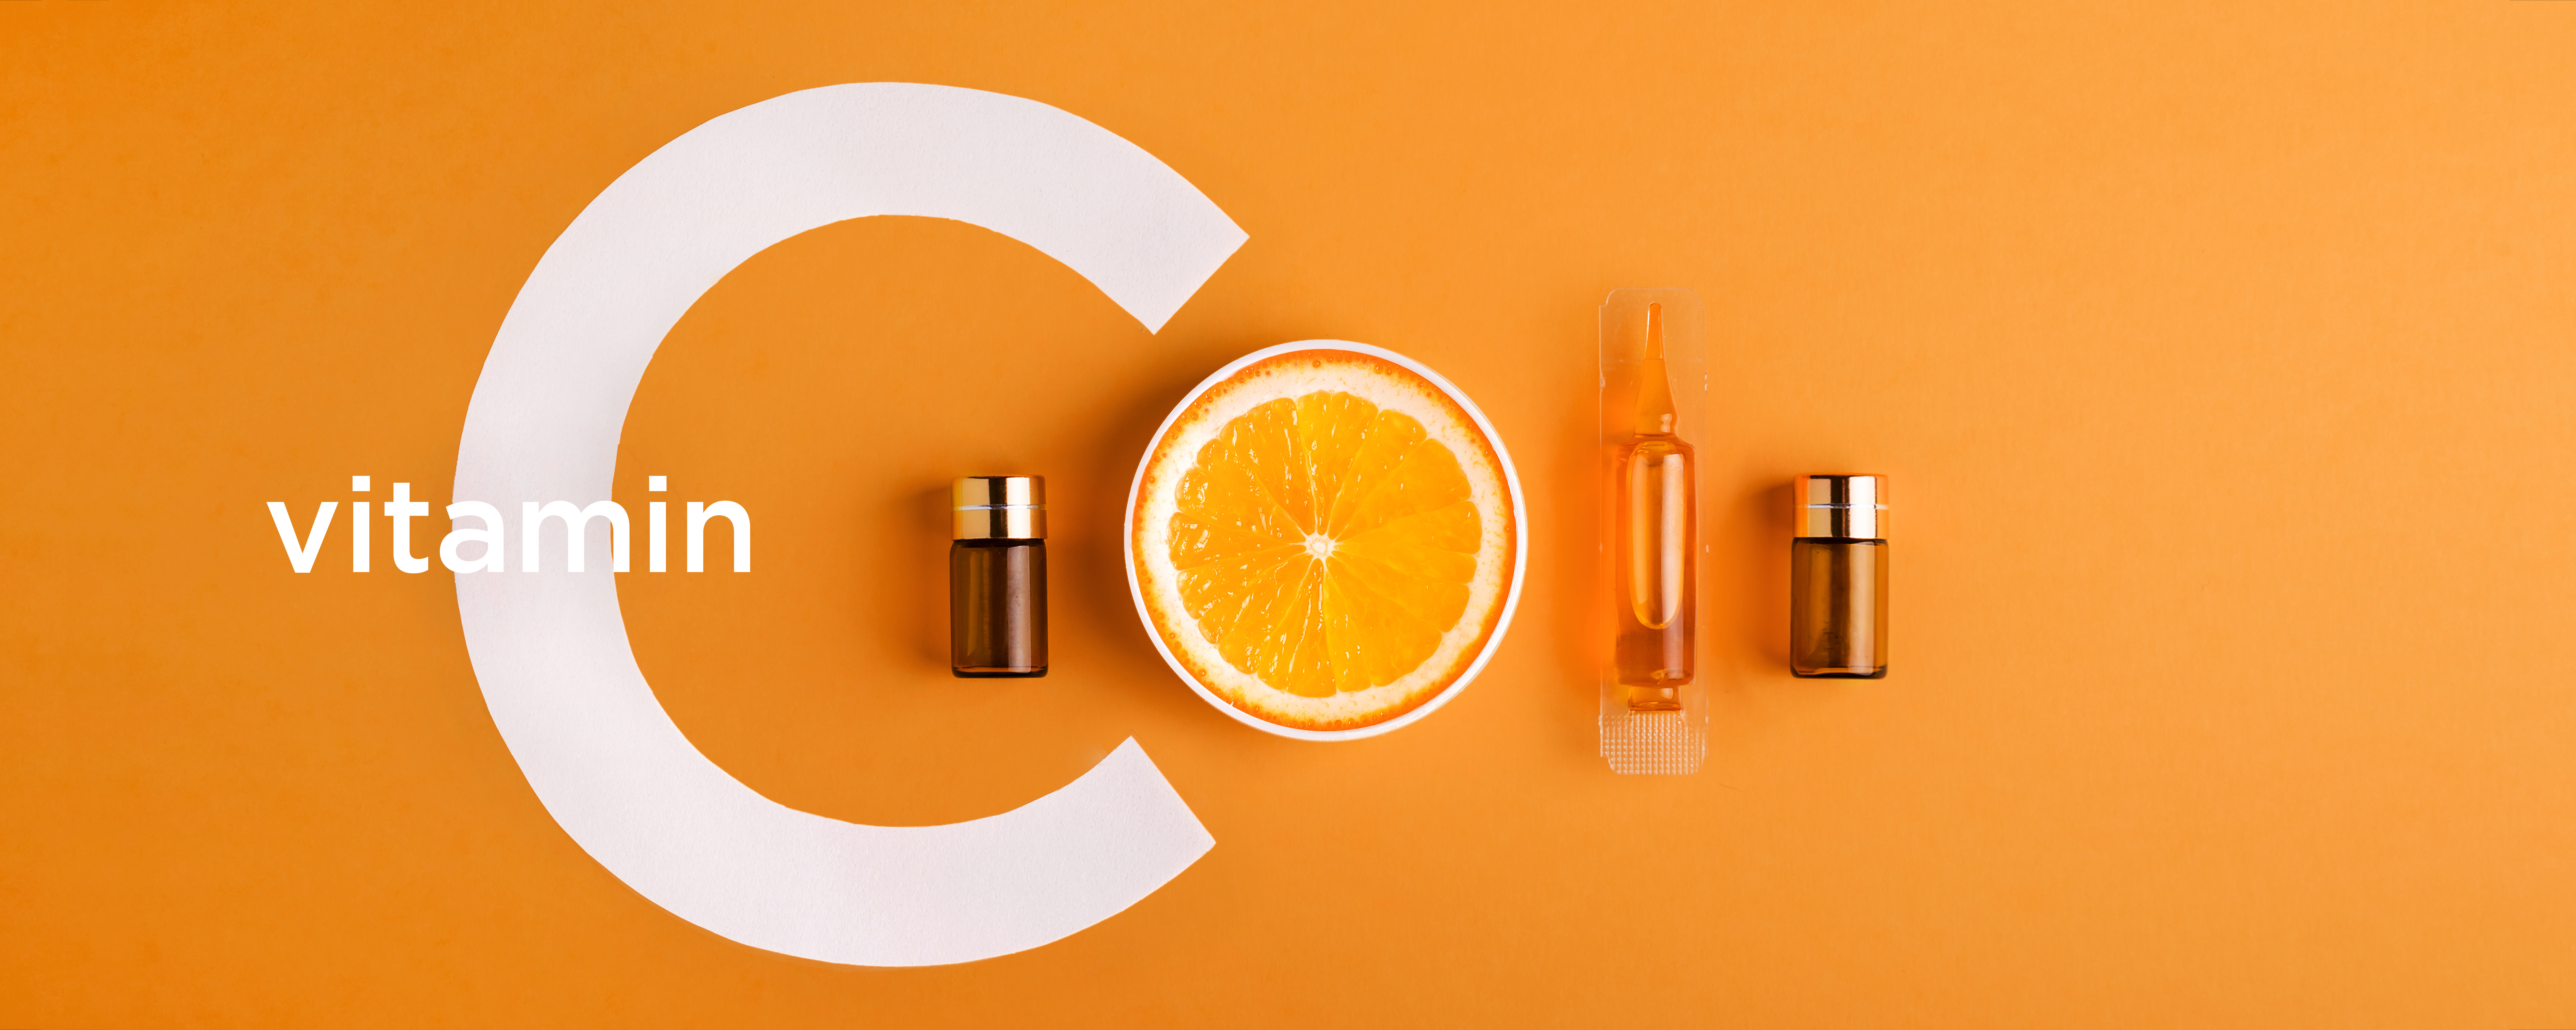 Vitamin C Skincare: The Benefits and How to Add It Into Your Routine